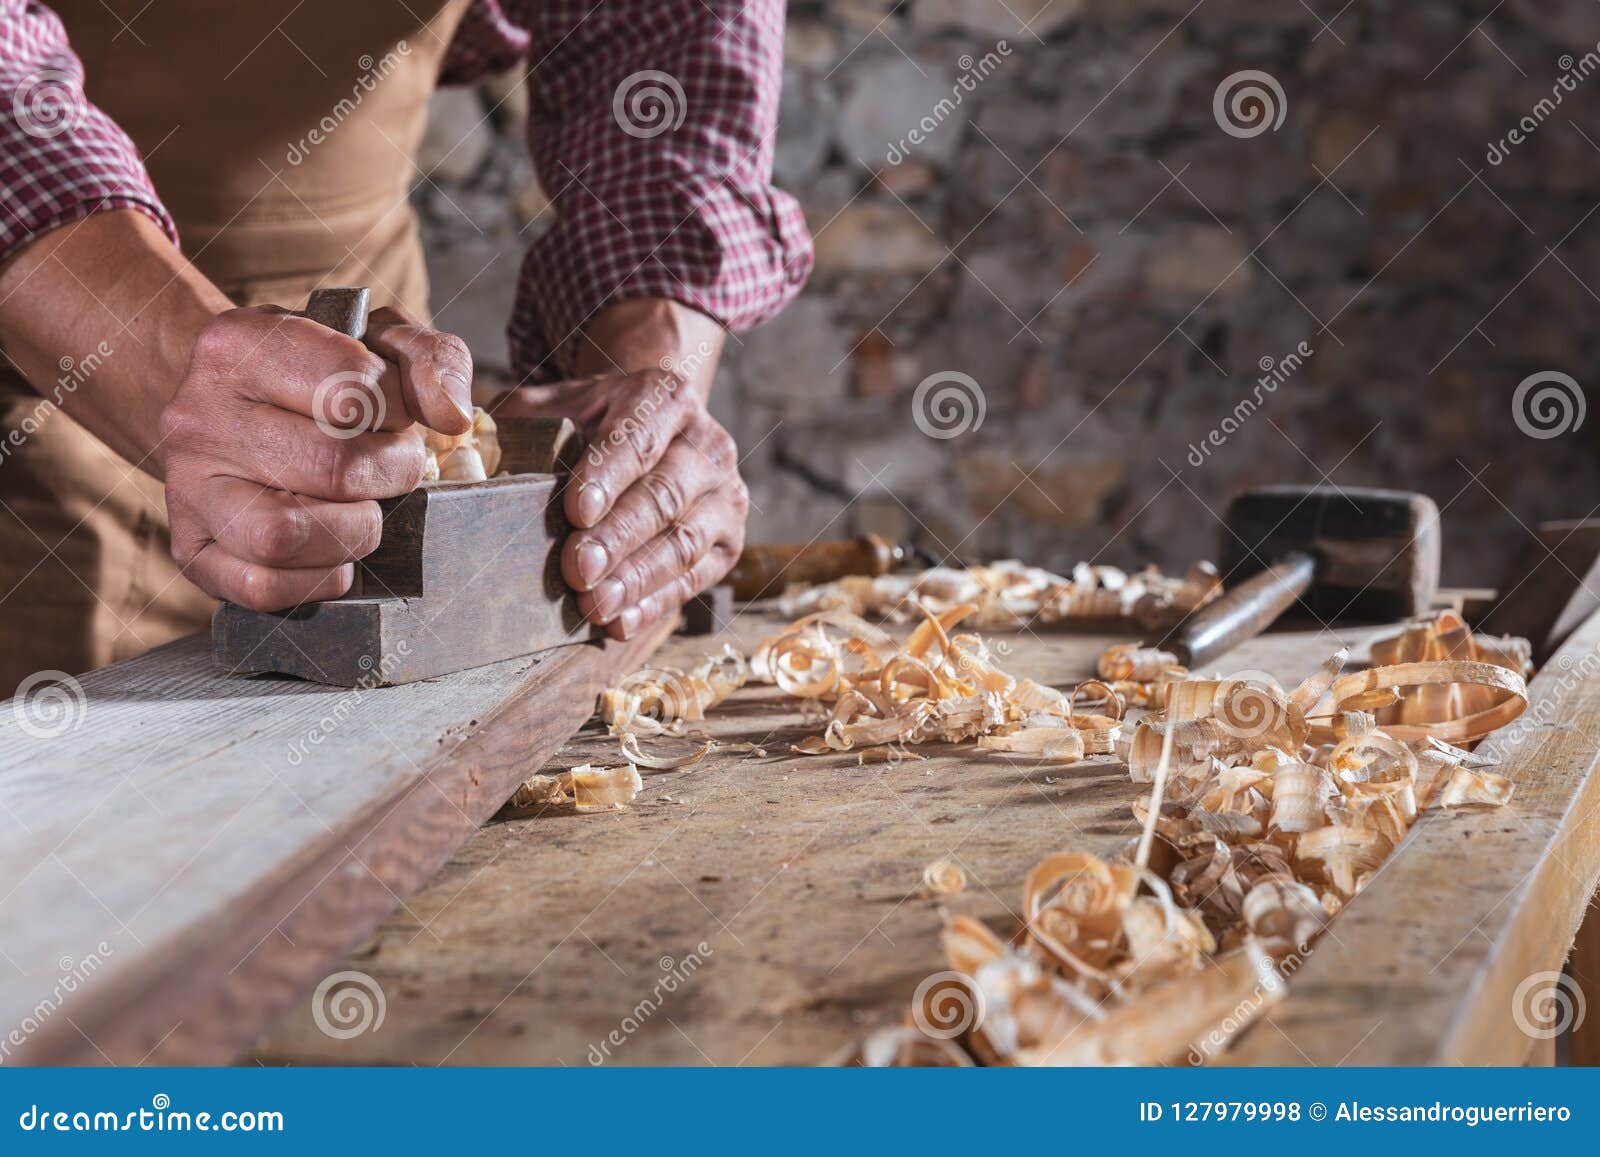 carpenter smoothing out long wooden beam with tool